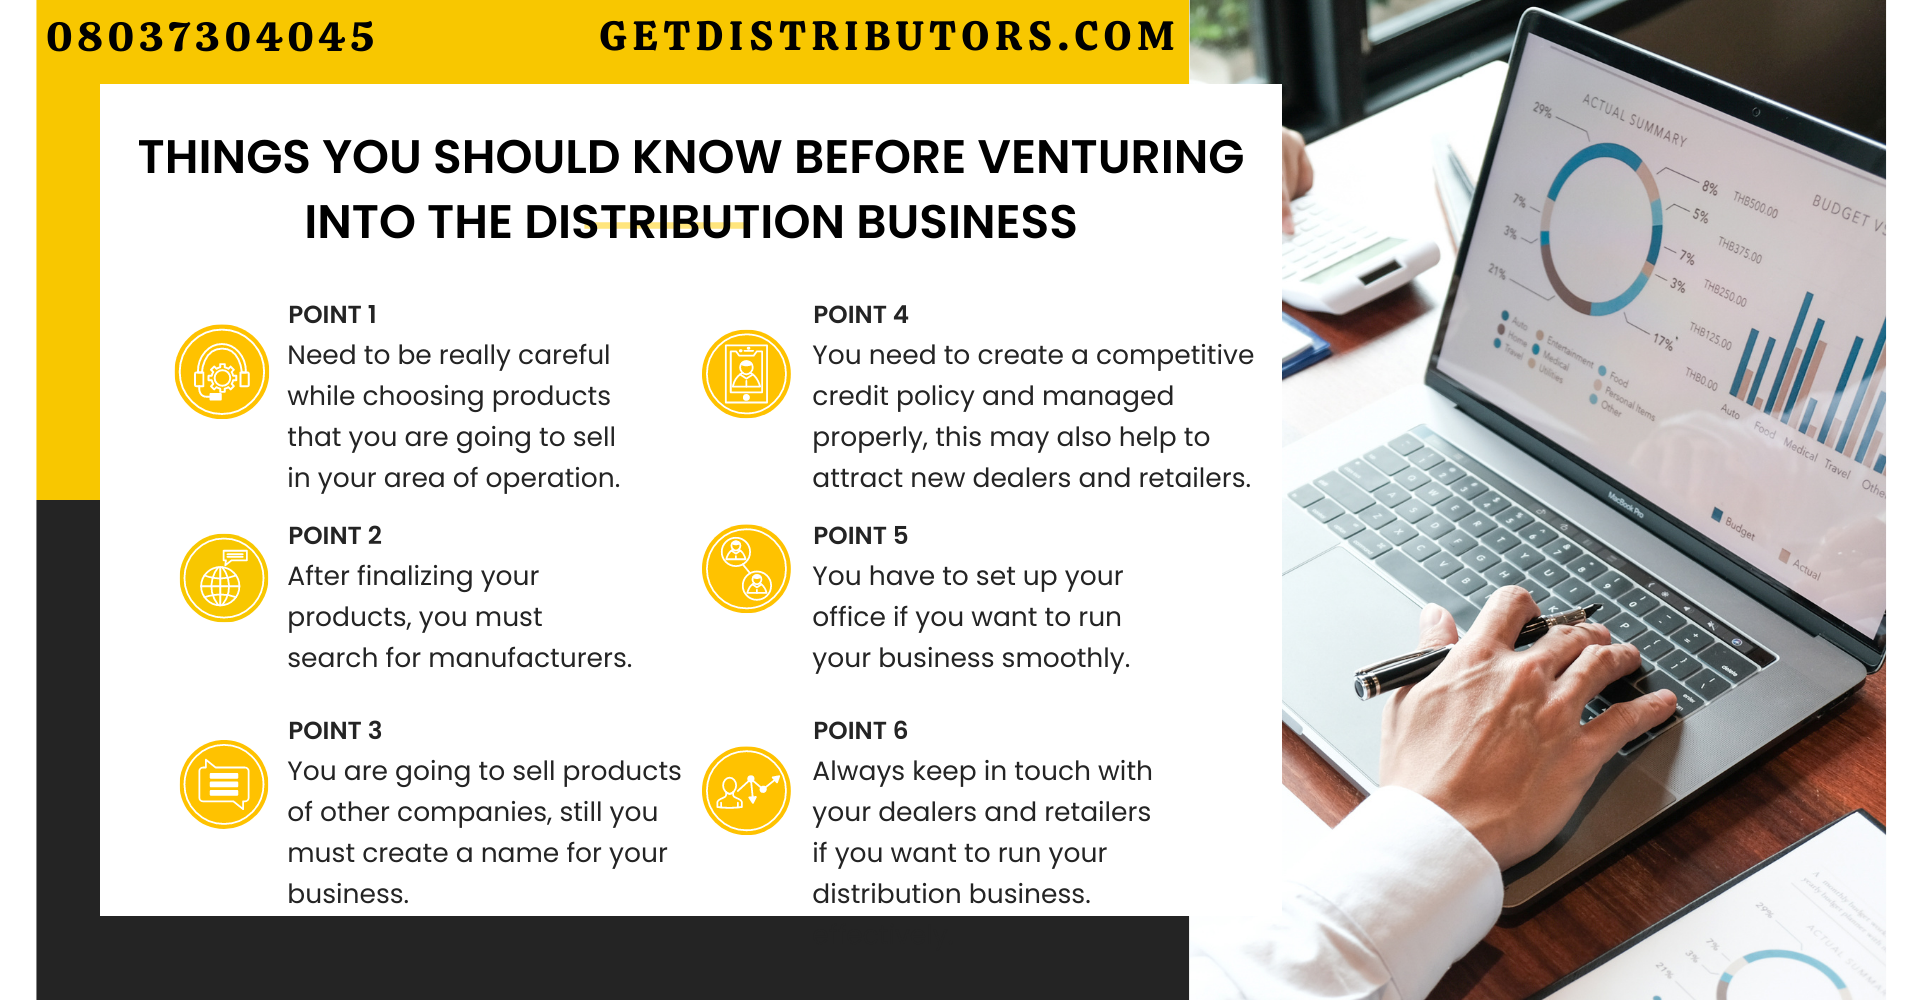 Things you should know before venturing into the distribution business